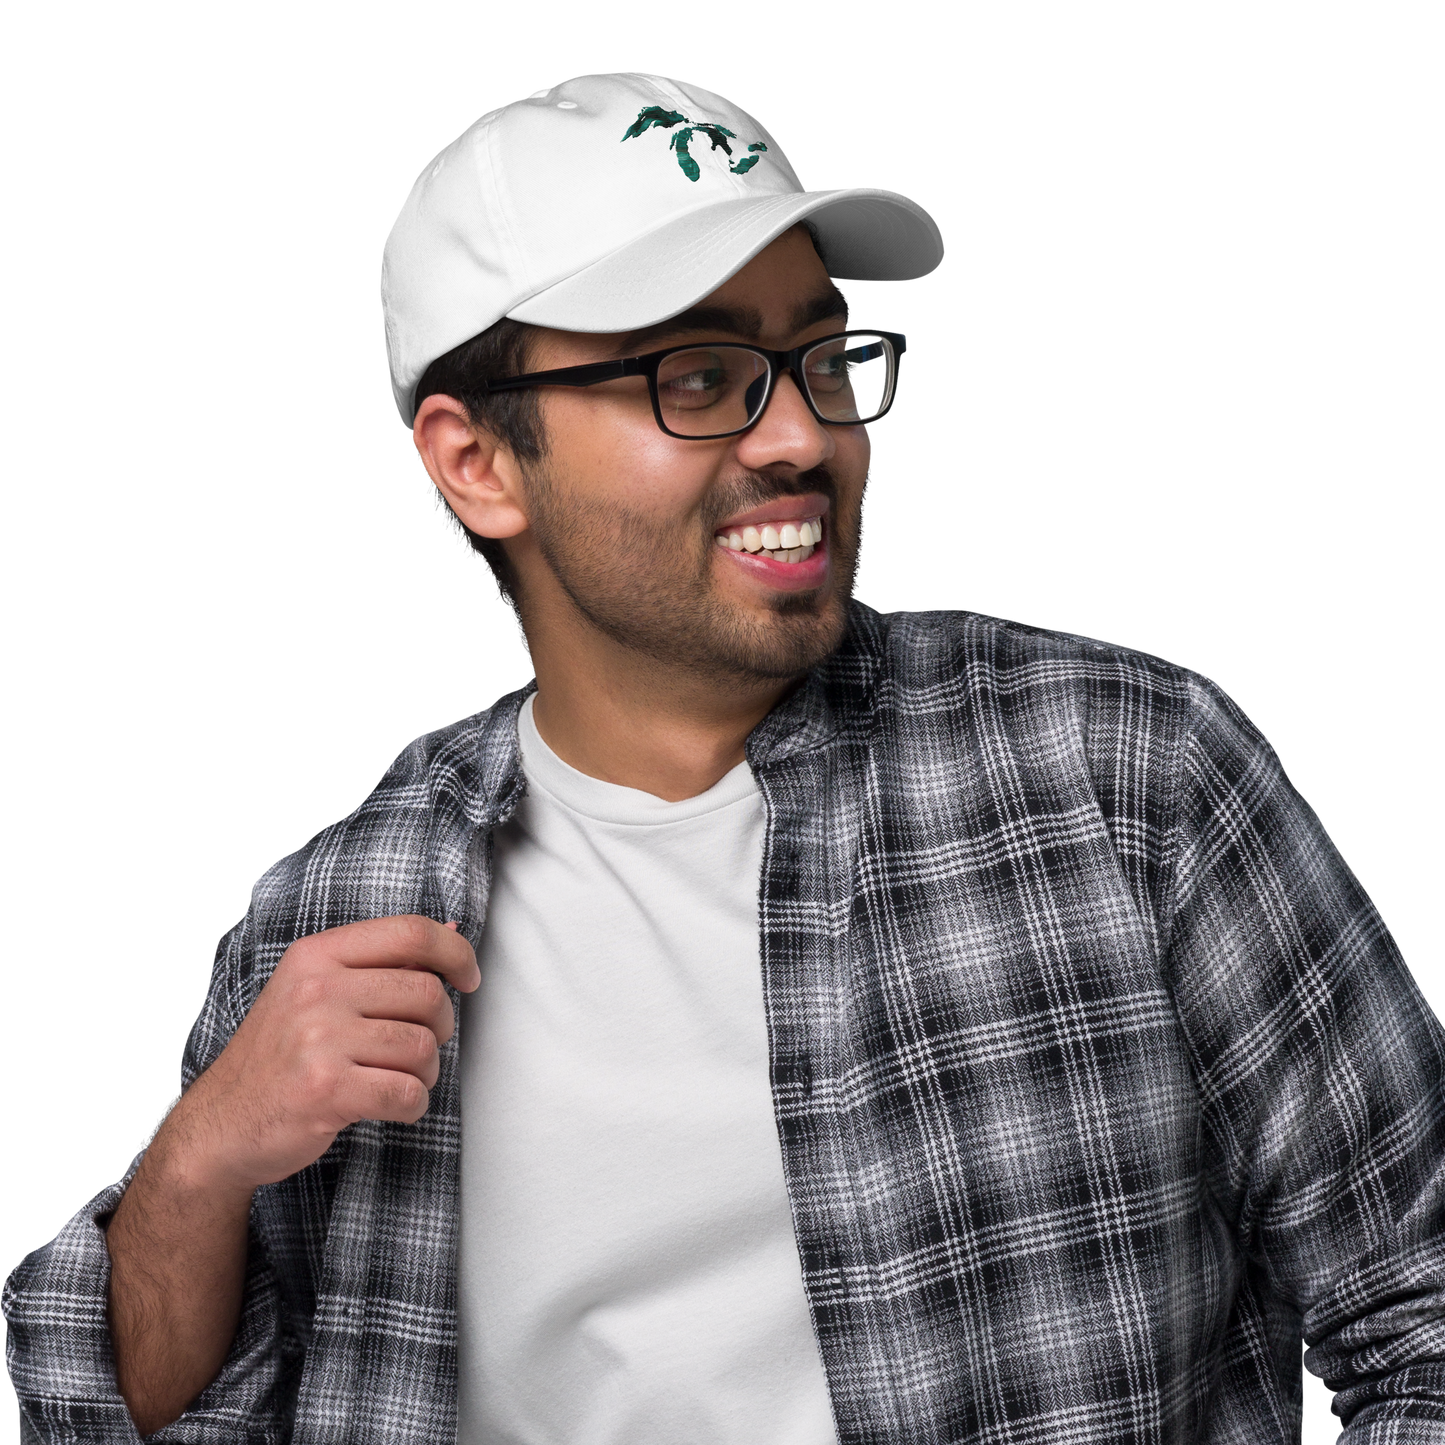 Great Lakes Dad Hat (Emerald Edition)